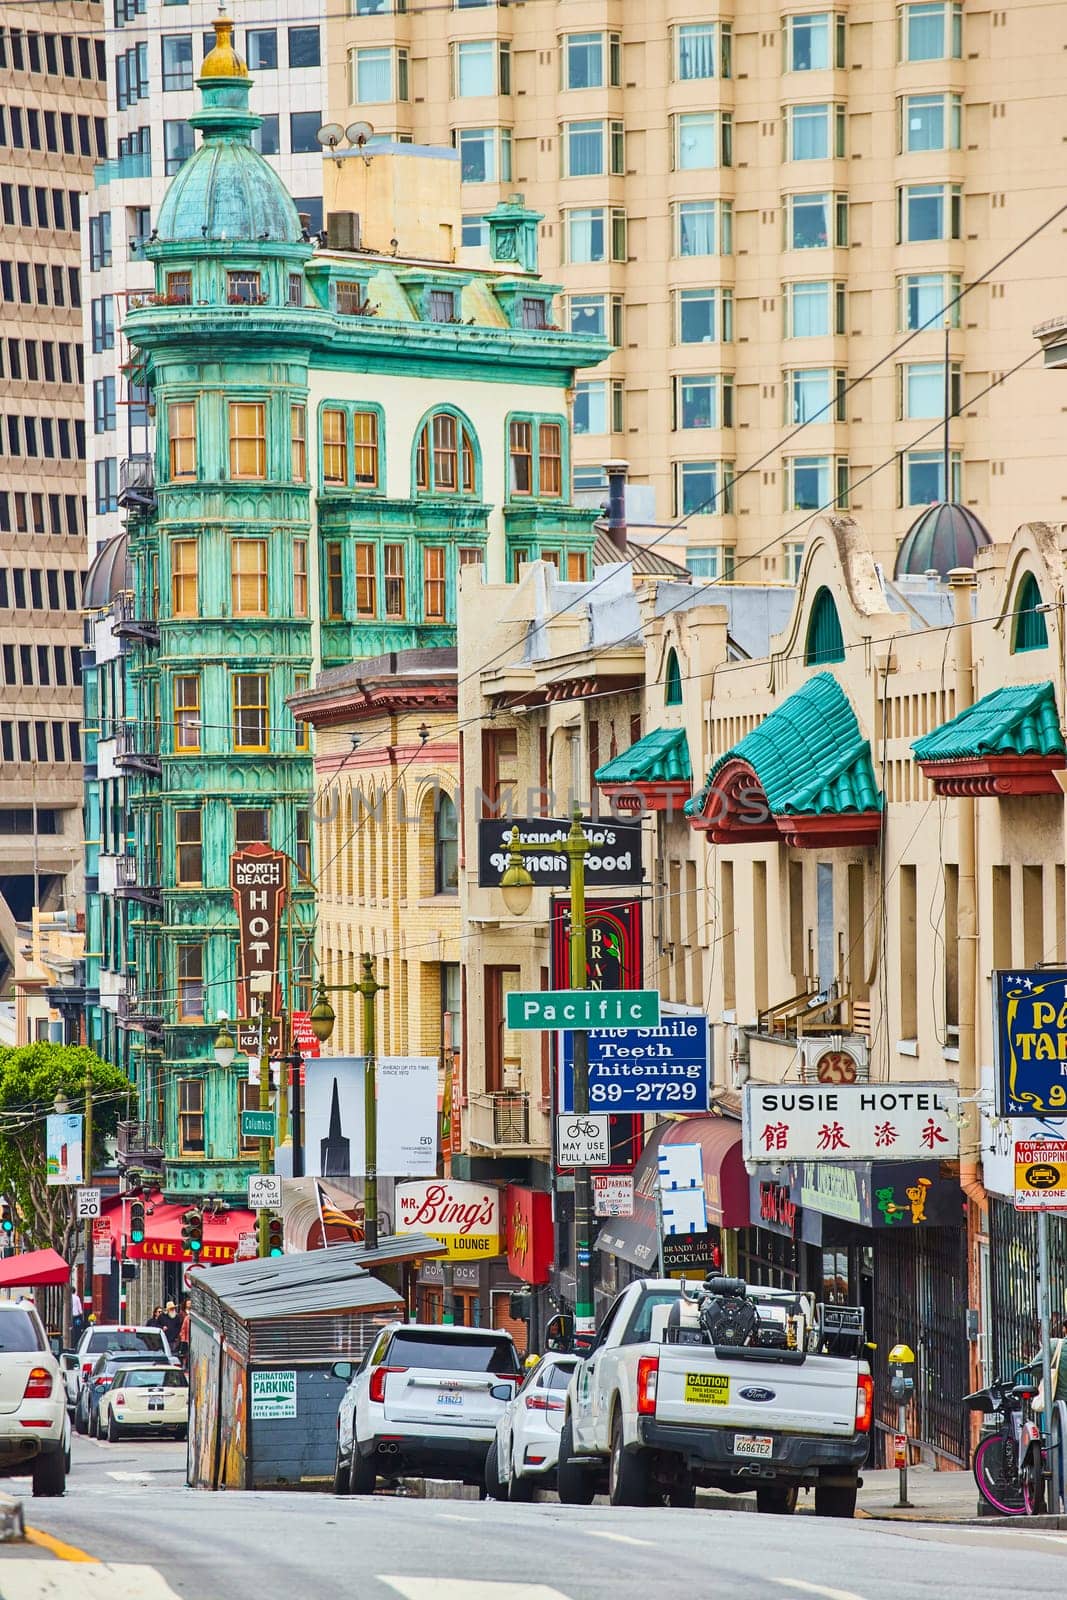 Image of Street view of Chinatown shops and restaurants with apartment buildings looming in distance